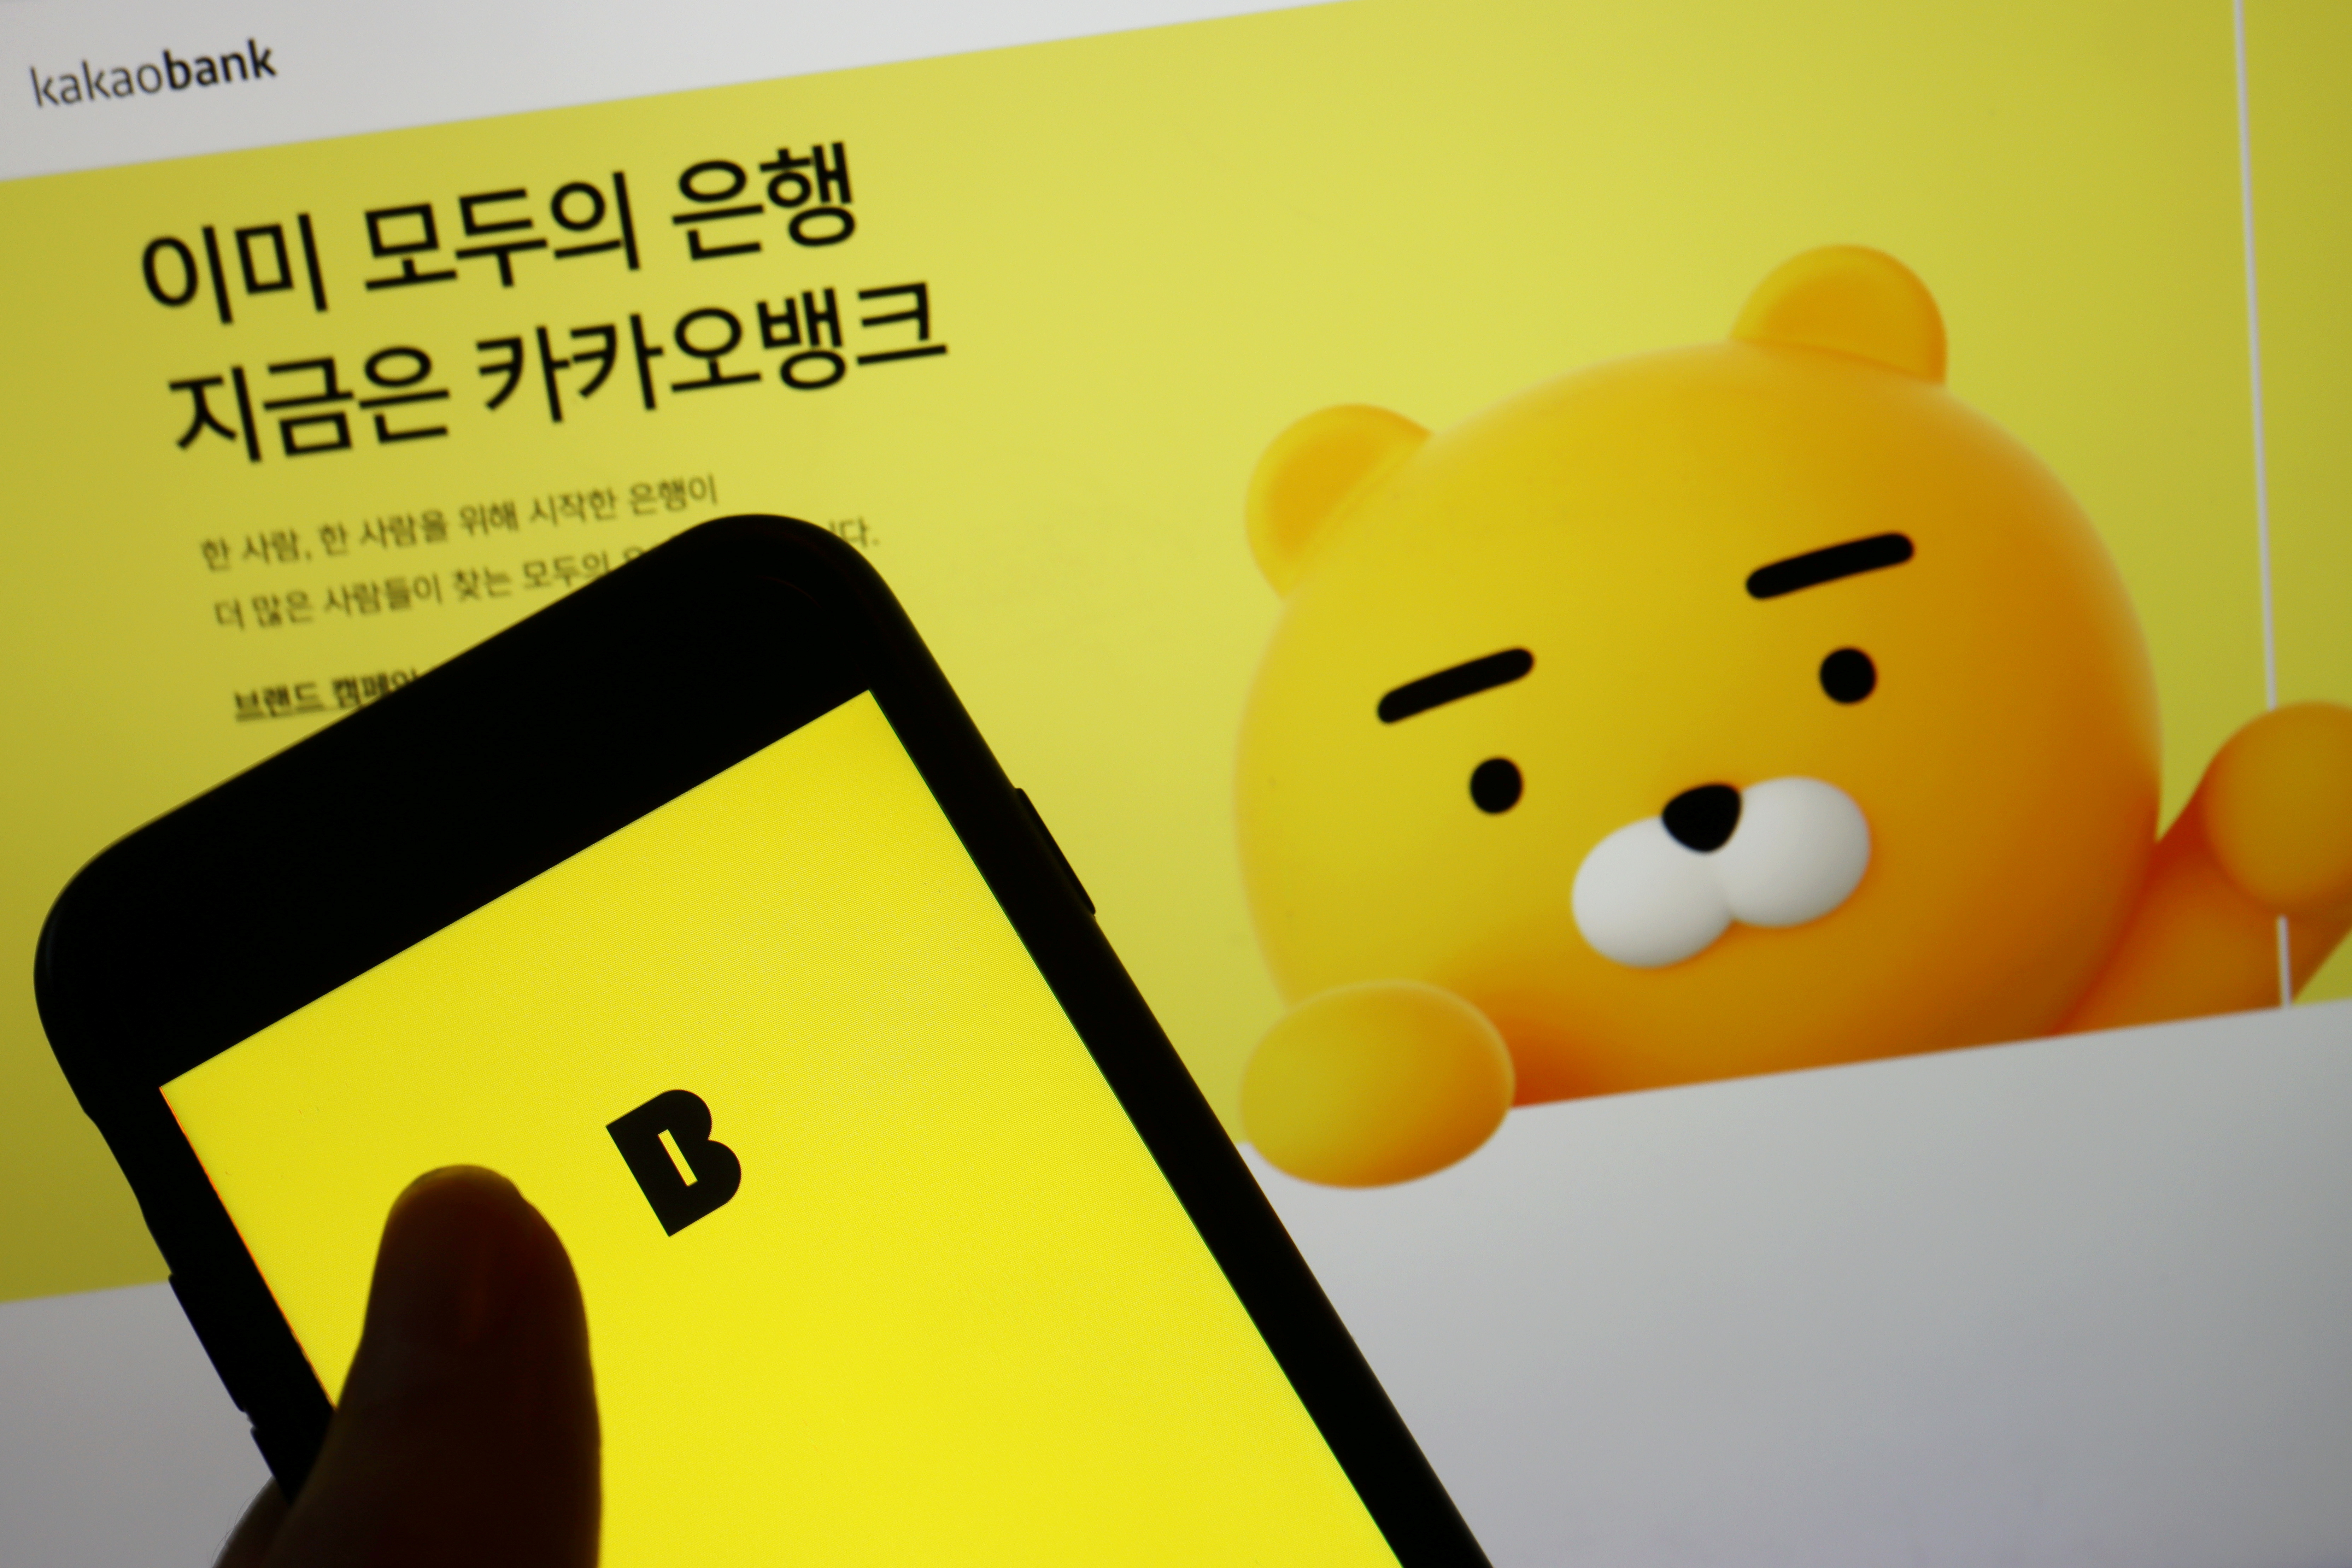 Digital lender Kakao Bank Corp made a stunning debut in Seoul earlier this month